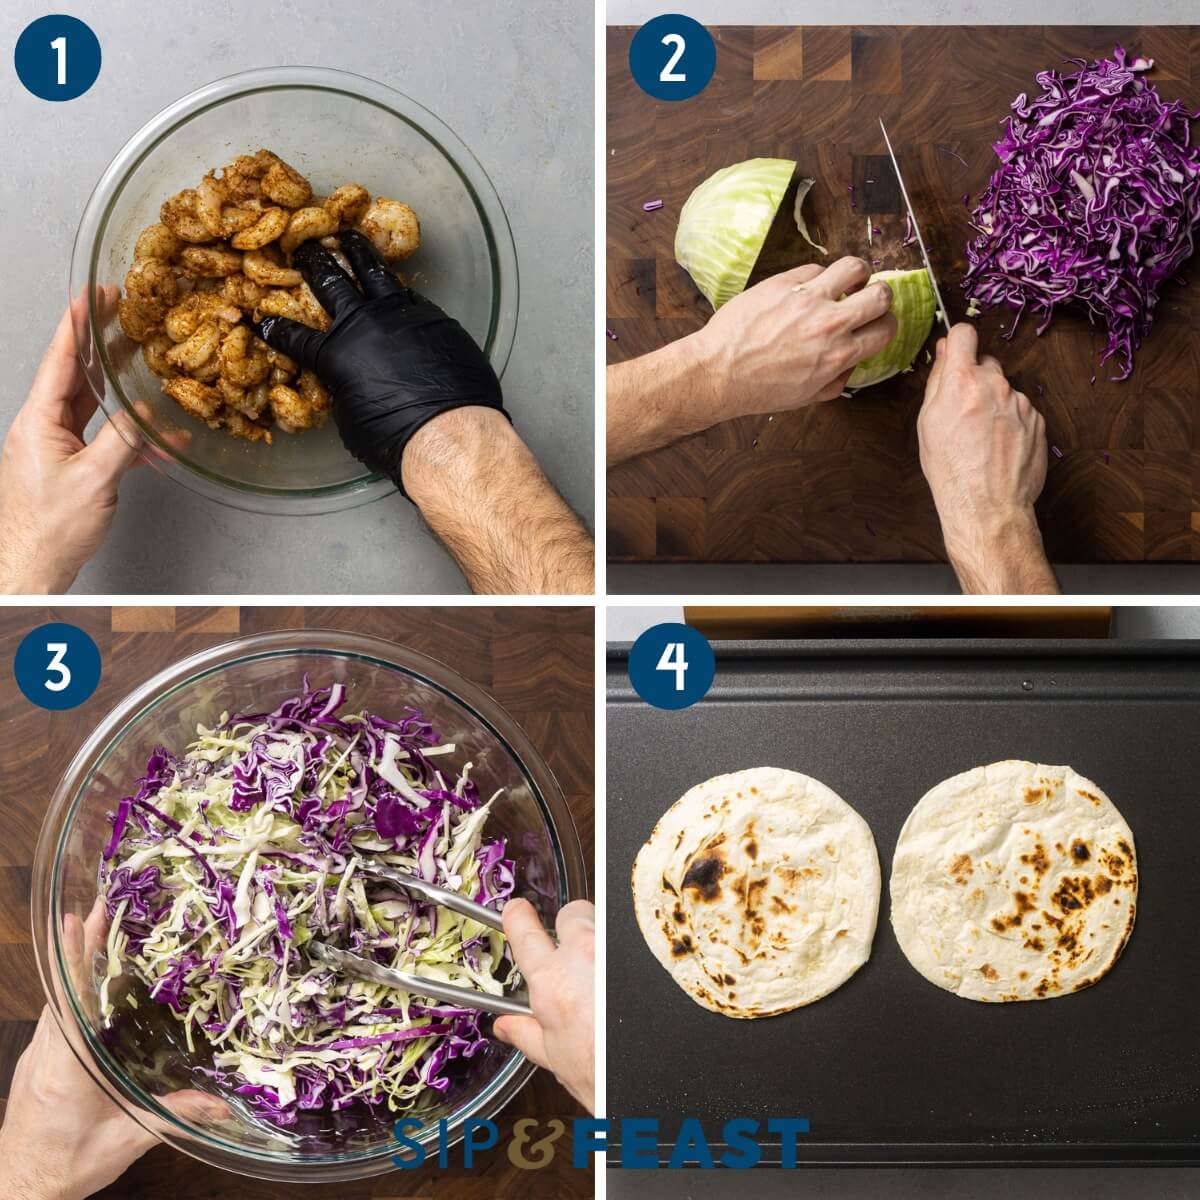 Spicy shrimp tacos recipe collage group one showing mixing shrimp in bowl, slicing cabbage, mixing cabbage with sauce, and charring of tortillas in griddle pan.